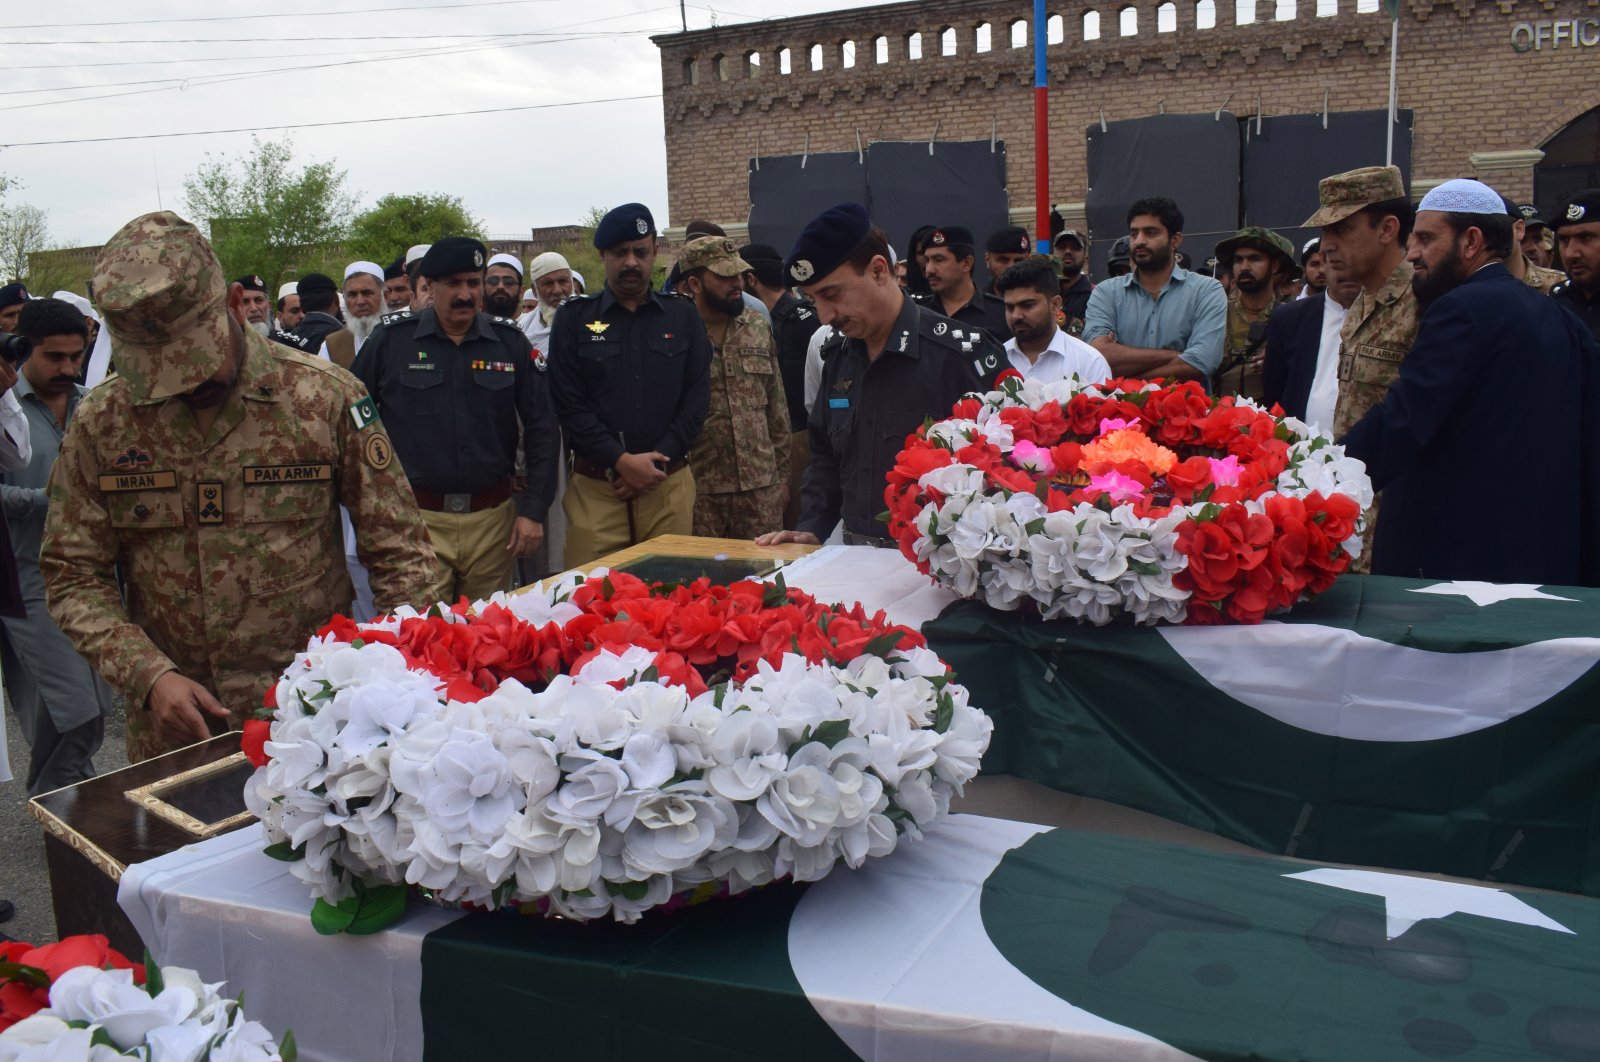 Police officials attend the funeral of fellow officers killed in an improvised explosive device (IED) blast in Lakki Marwat, Pakistan, March 30, 2023. (EPA Photo)